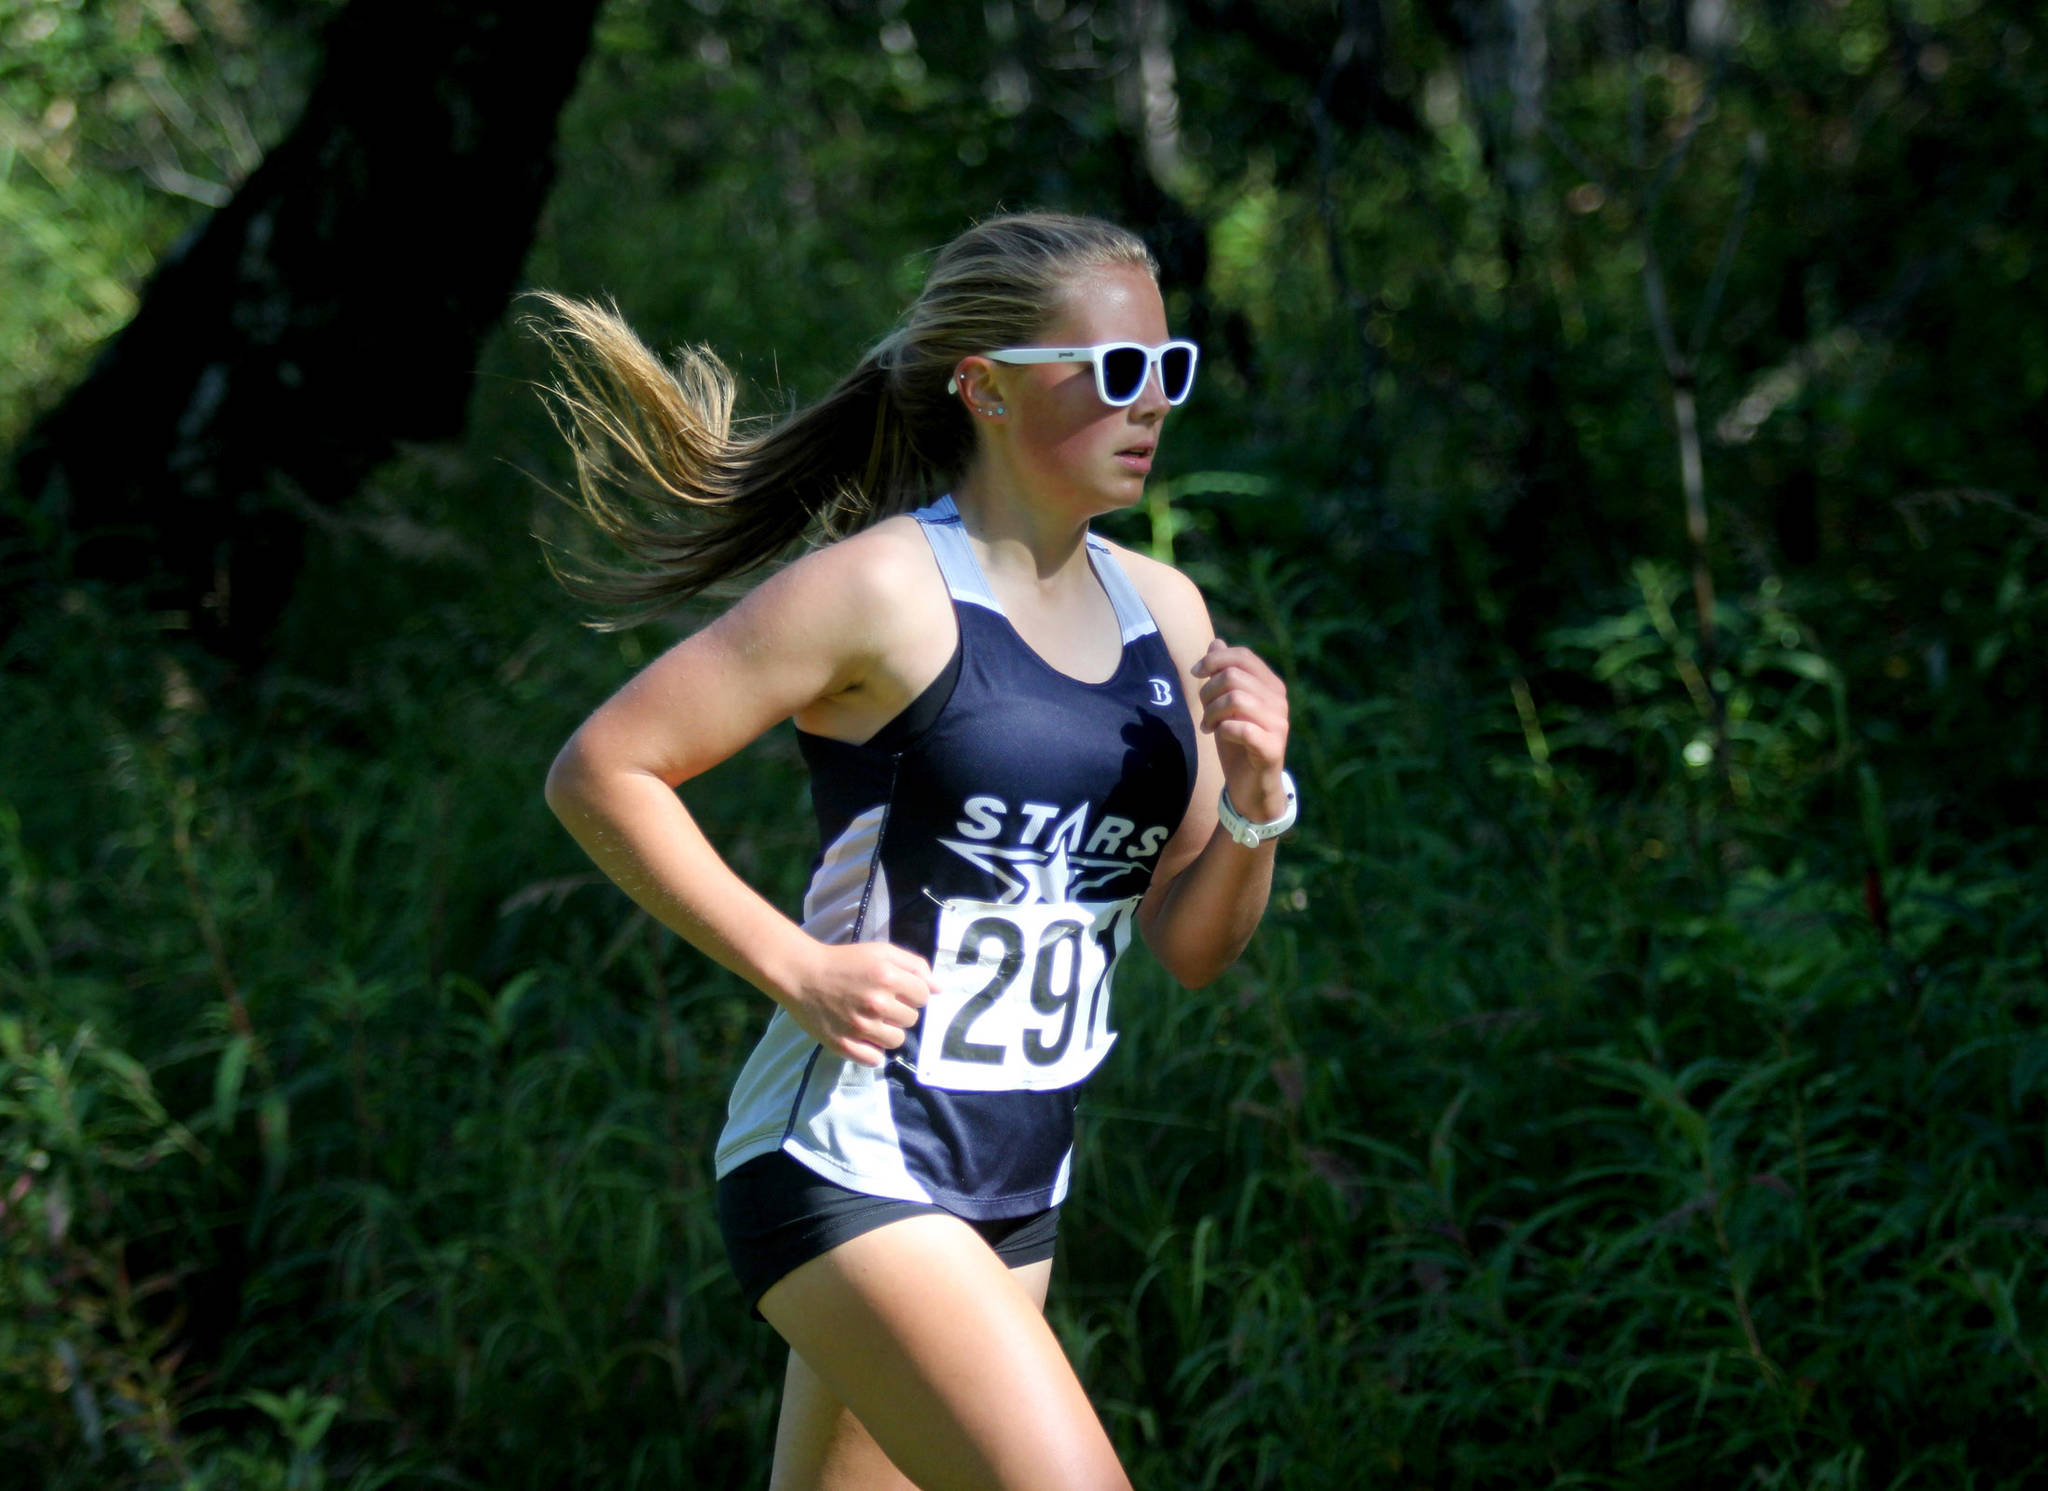 Soldotna’s Jordan Strausbaugh makes her way down the course during the Colony Invitational on Saturday, Aug. 28, 2021, at Colony High School. Strausbaugh finished fourth. (Photo by Jeremiah Bartz/Frontiersman)